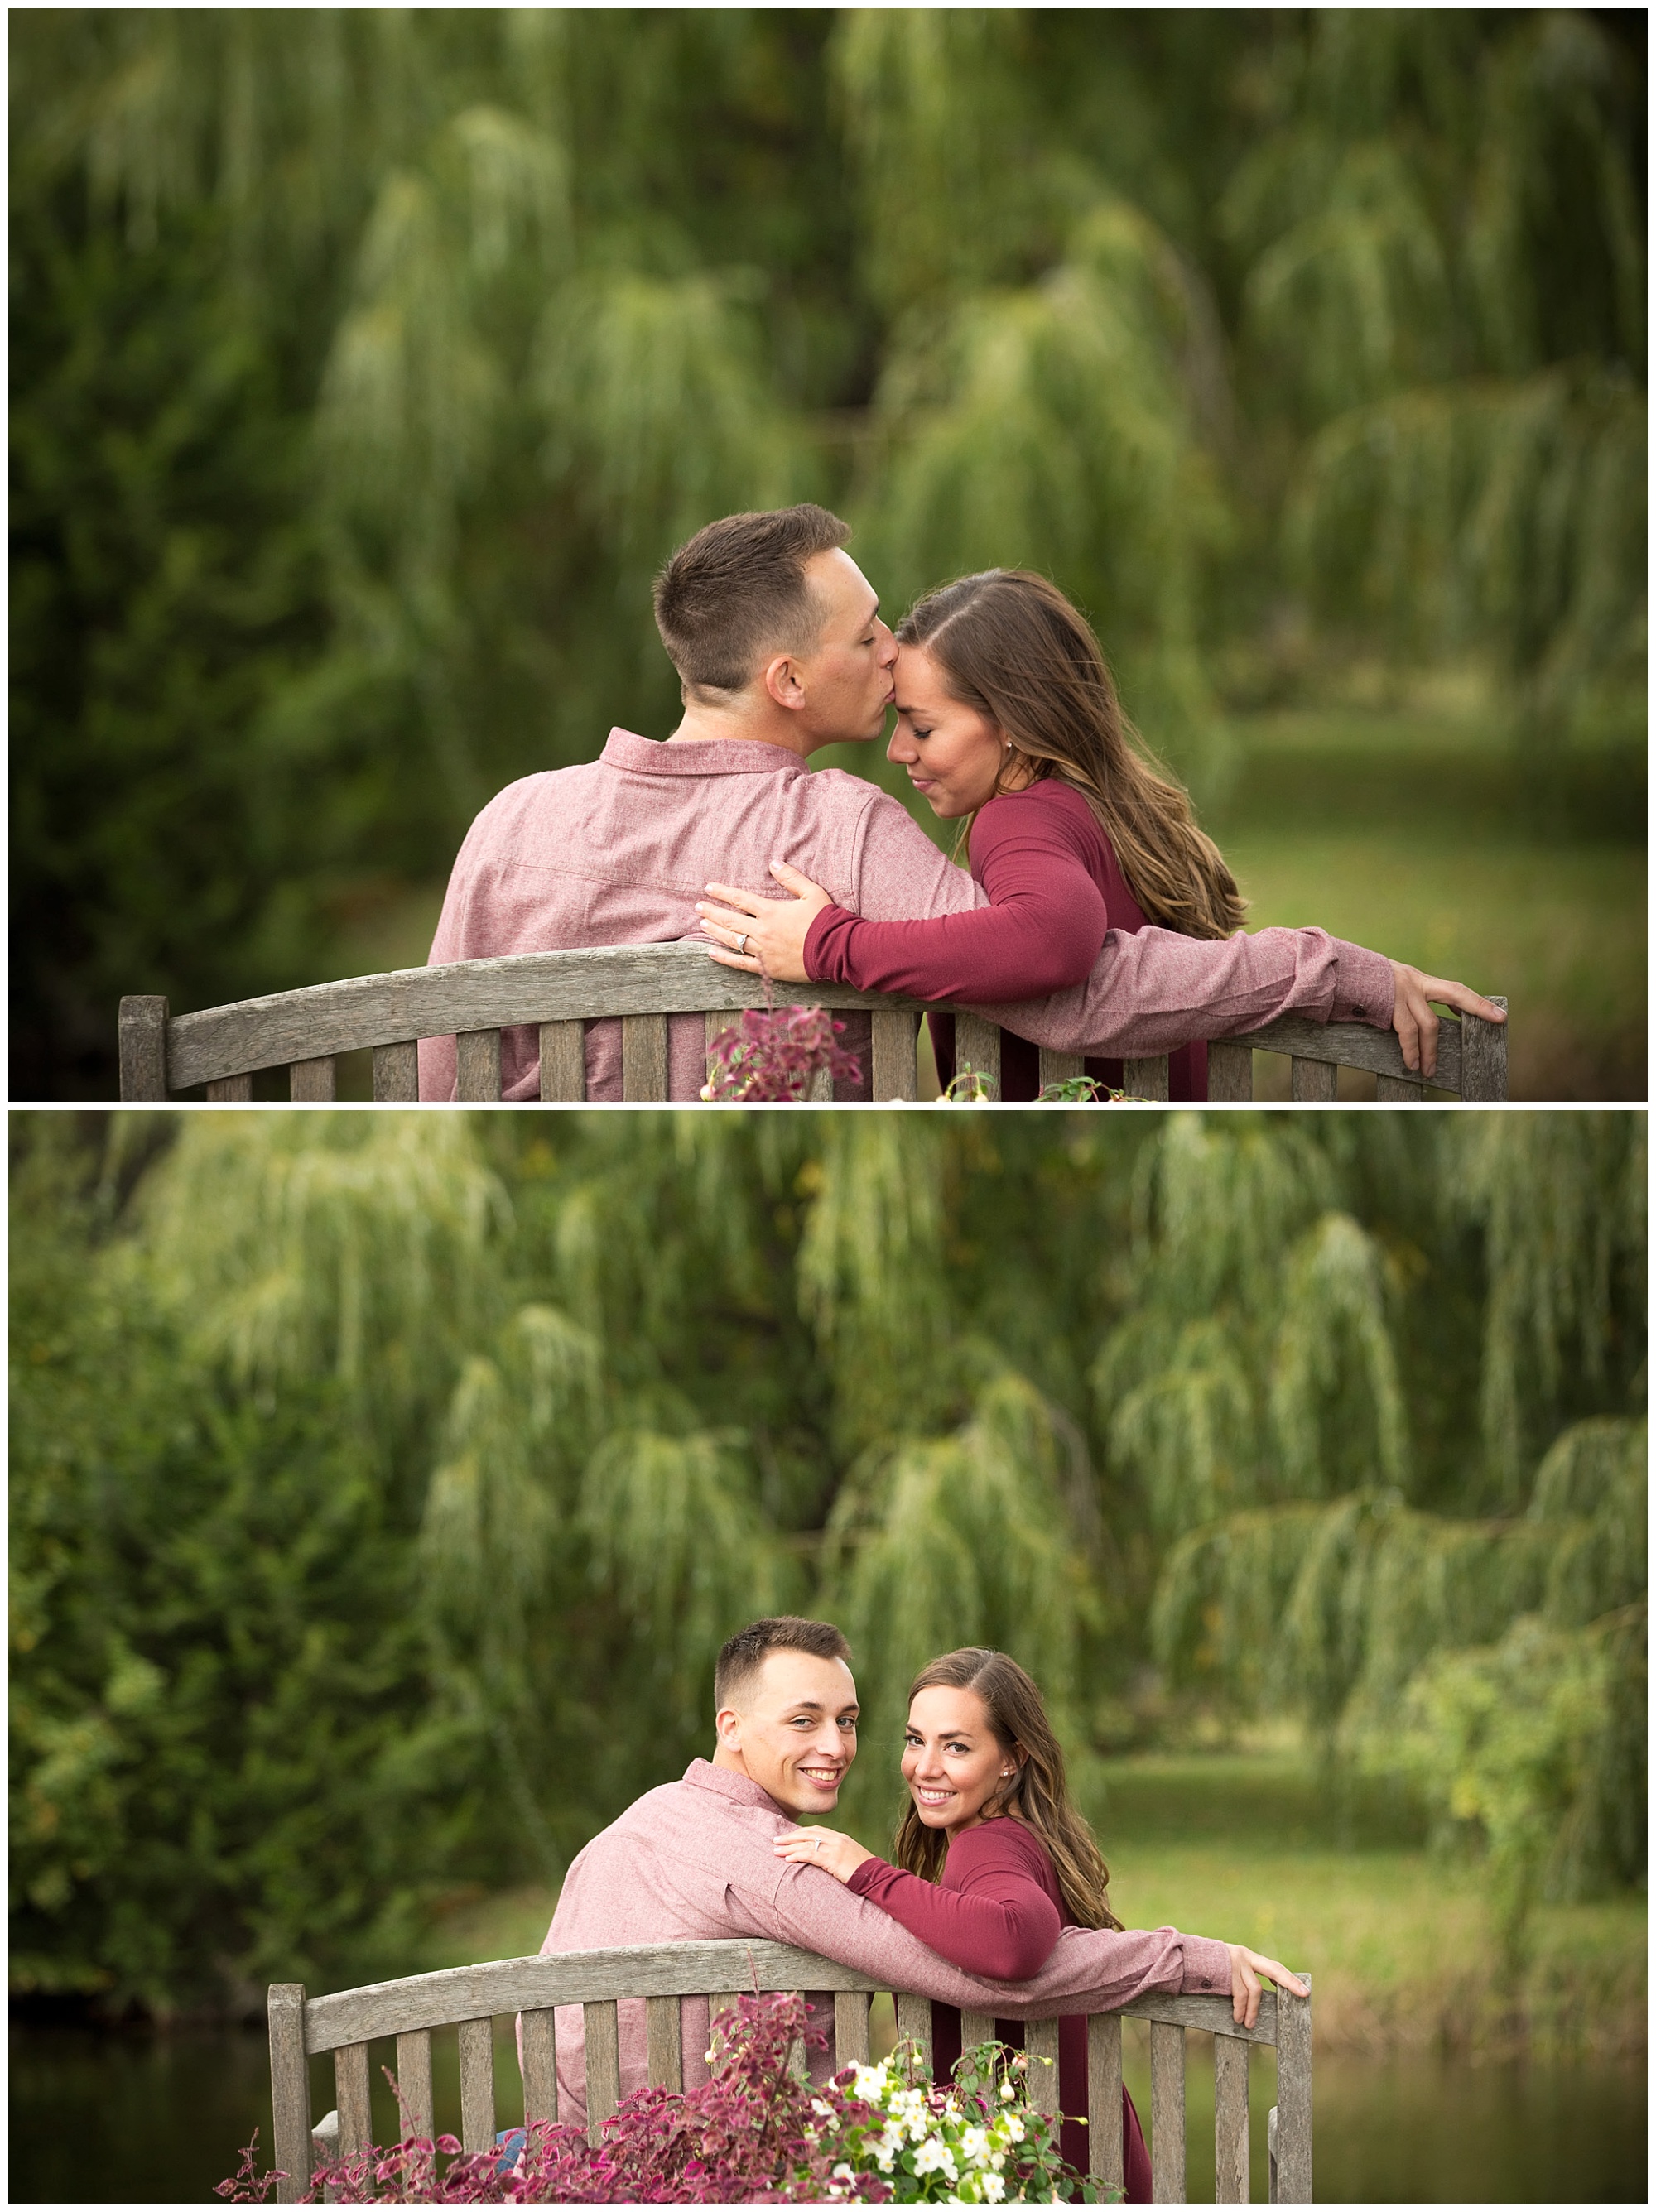 Two photos of an engaged couple sitting on a garden bench. Once looking at the camera and the other with him kissing her forehead.